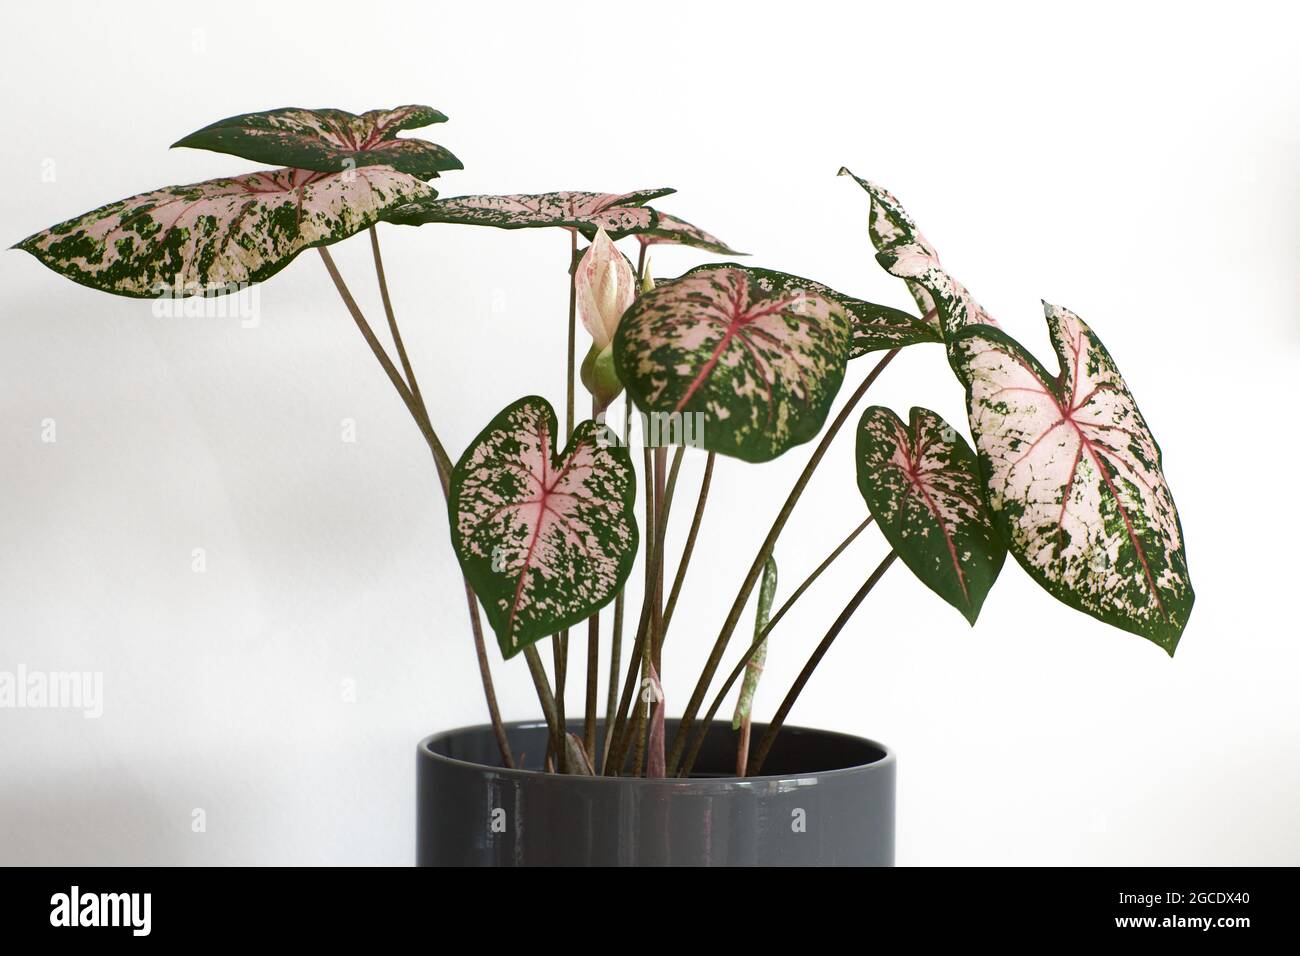 Caladium pink beauty bulb with amazing leafs. The pink and green leafs are beautiful against the white background. Stock Photo